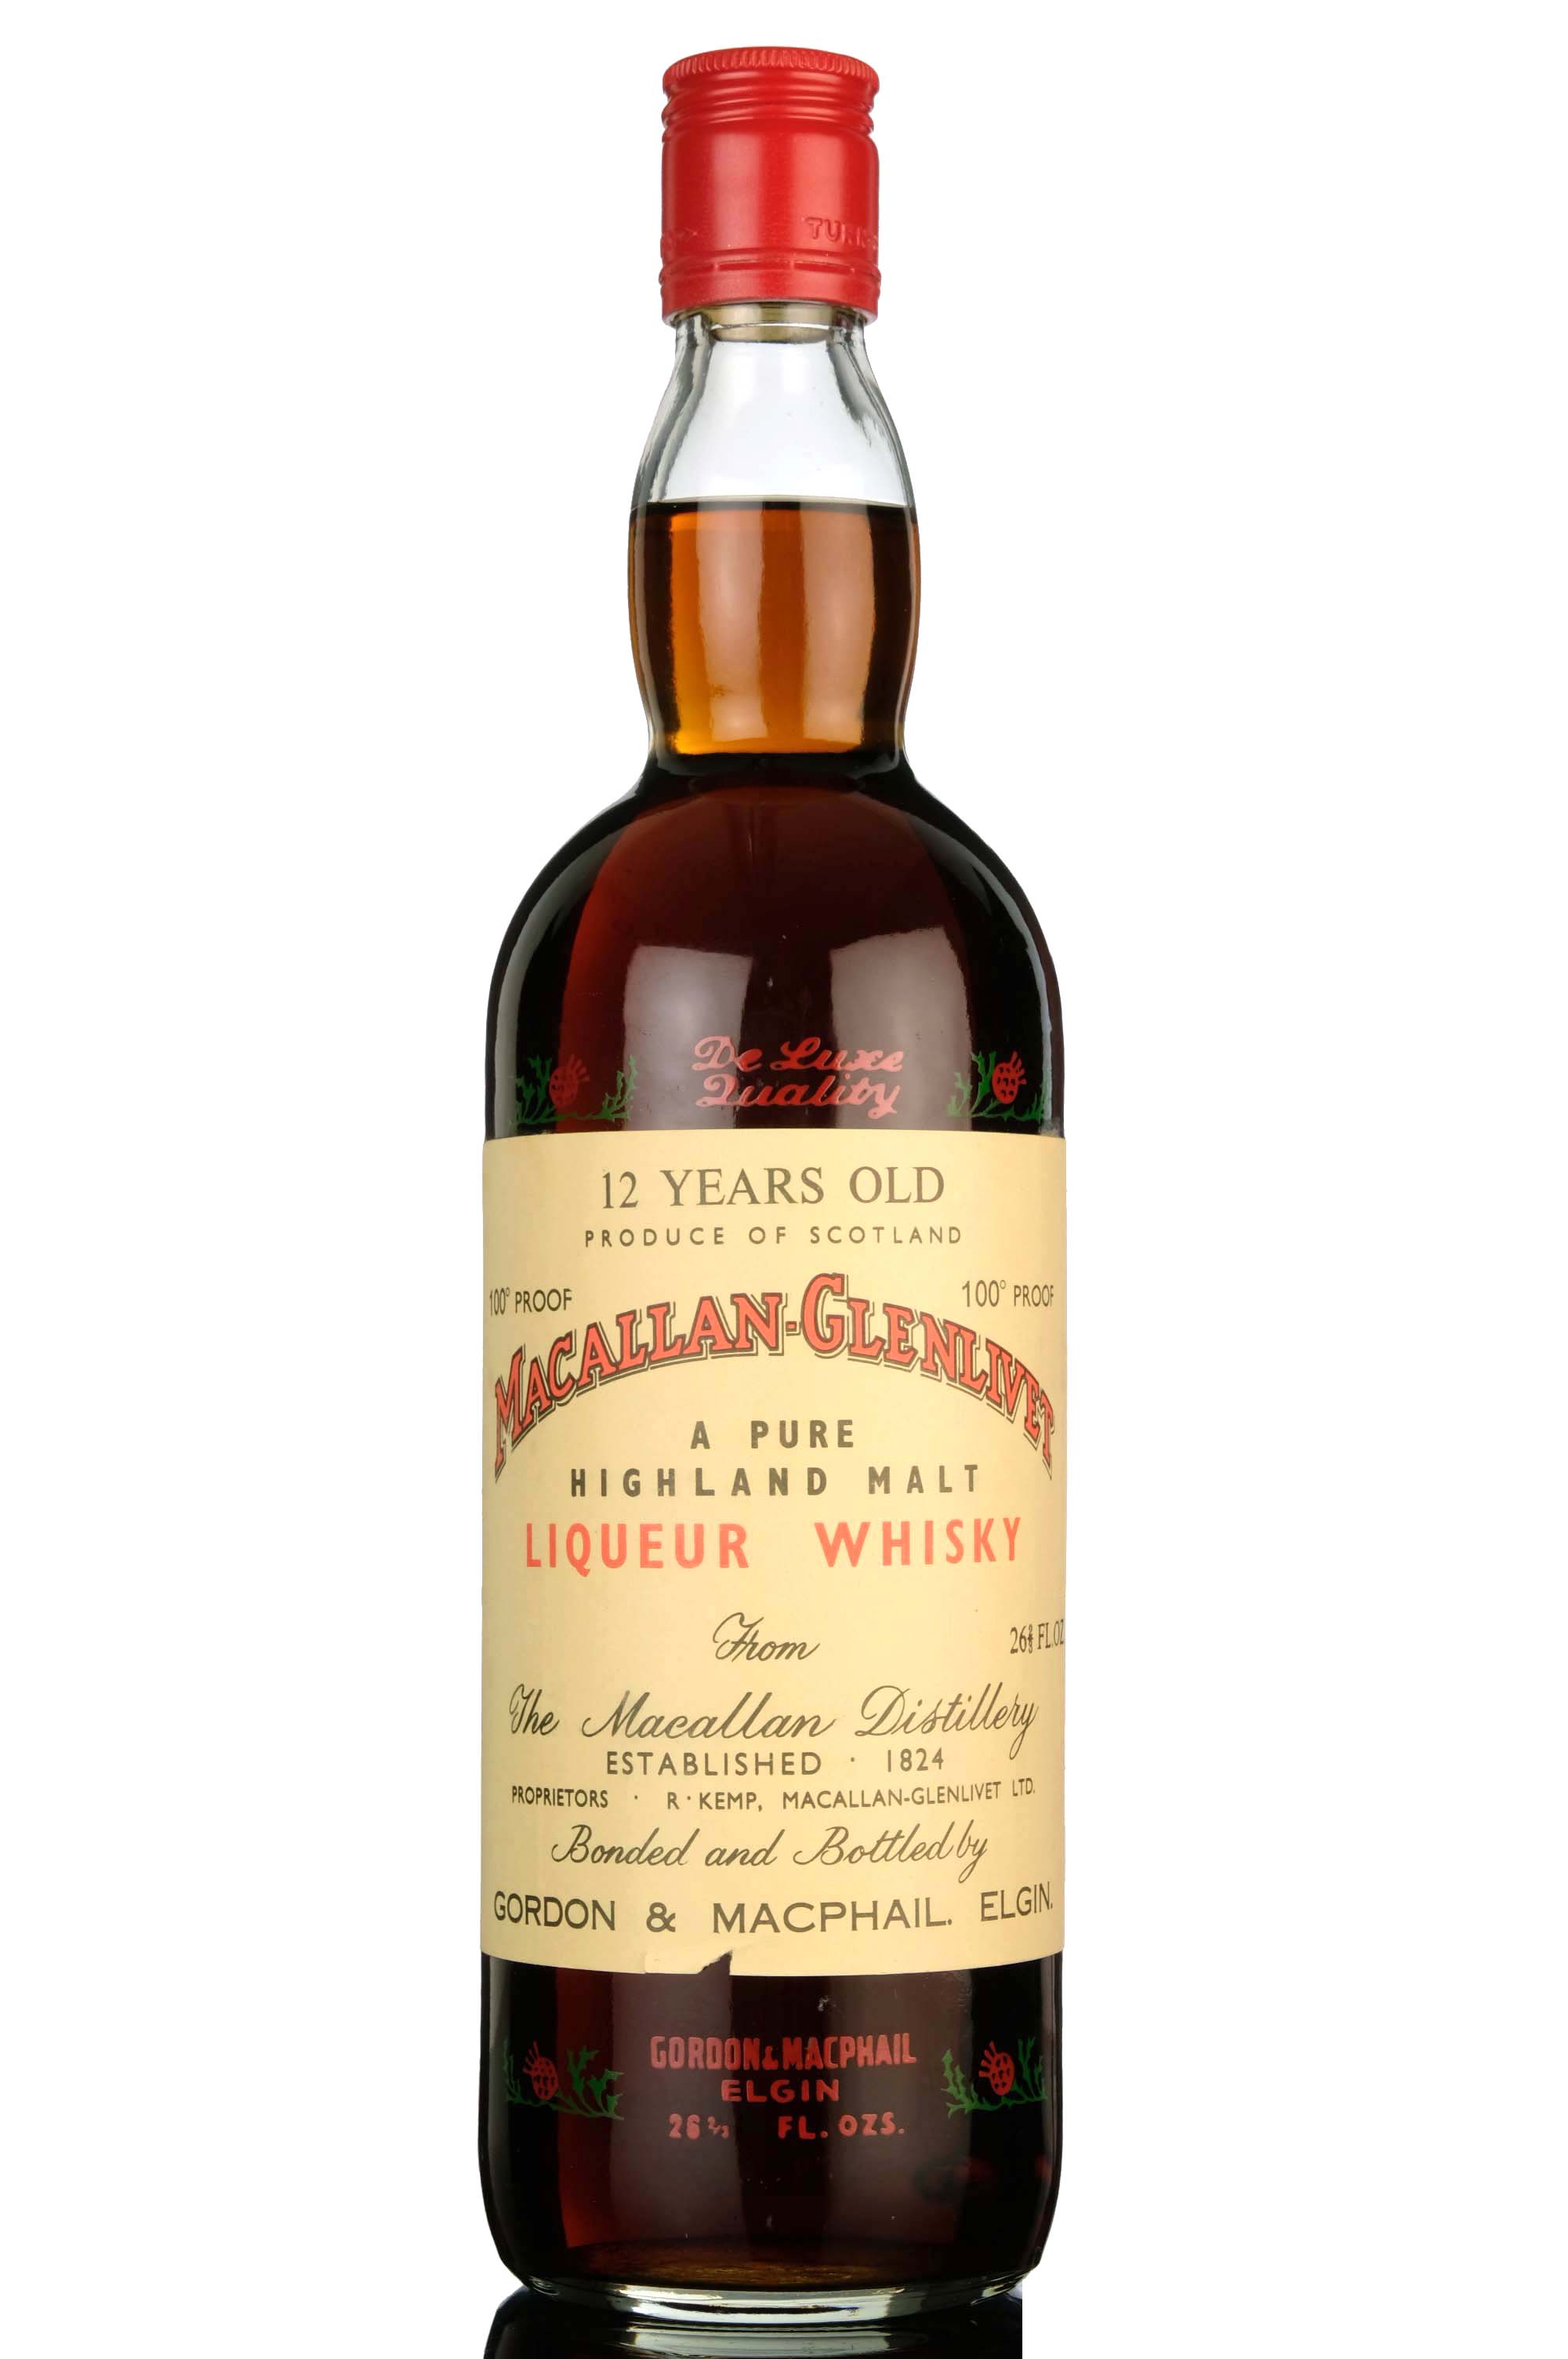 Macallan 12 Year Old - Liqueur Whisky - 100 Proof - Rotation 1971